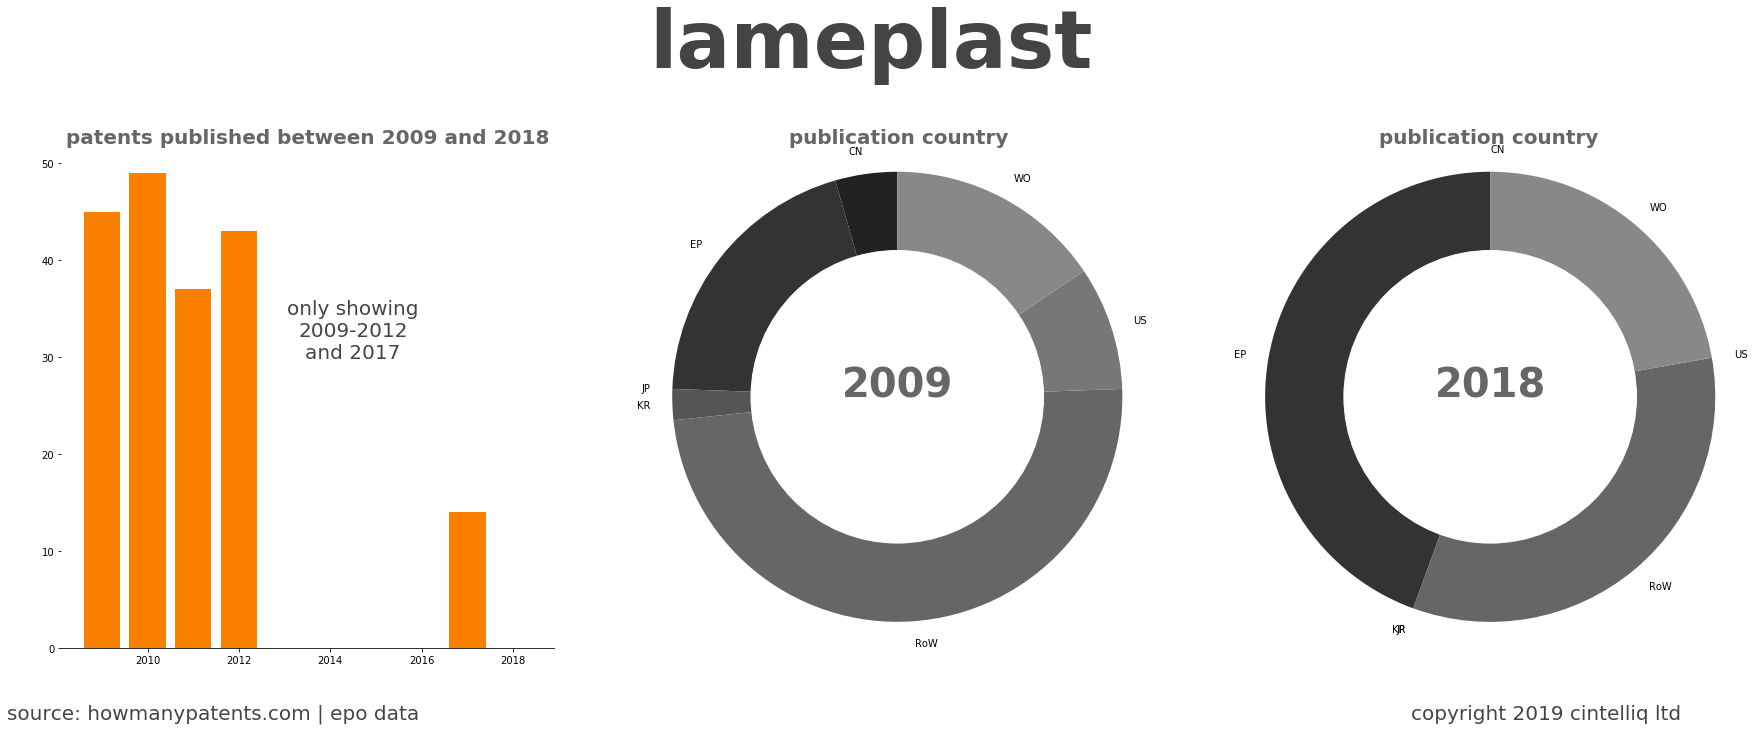 summary of patents for Lameplast